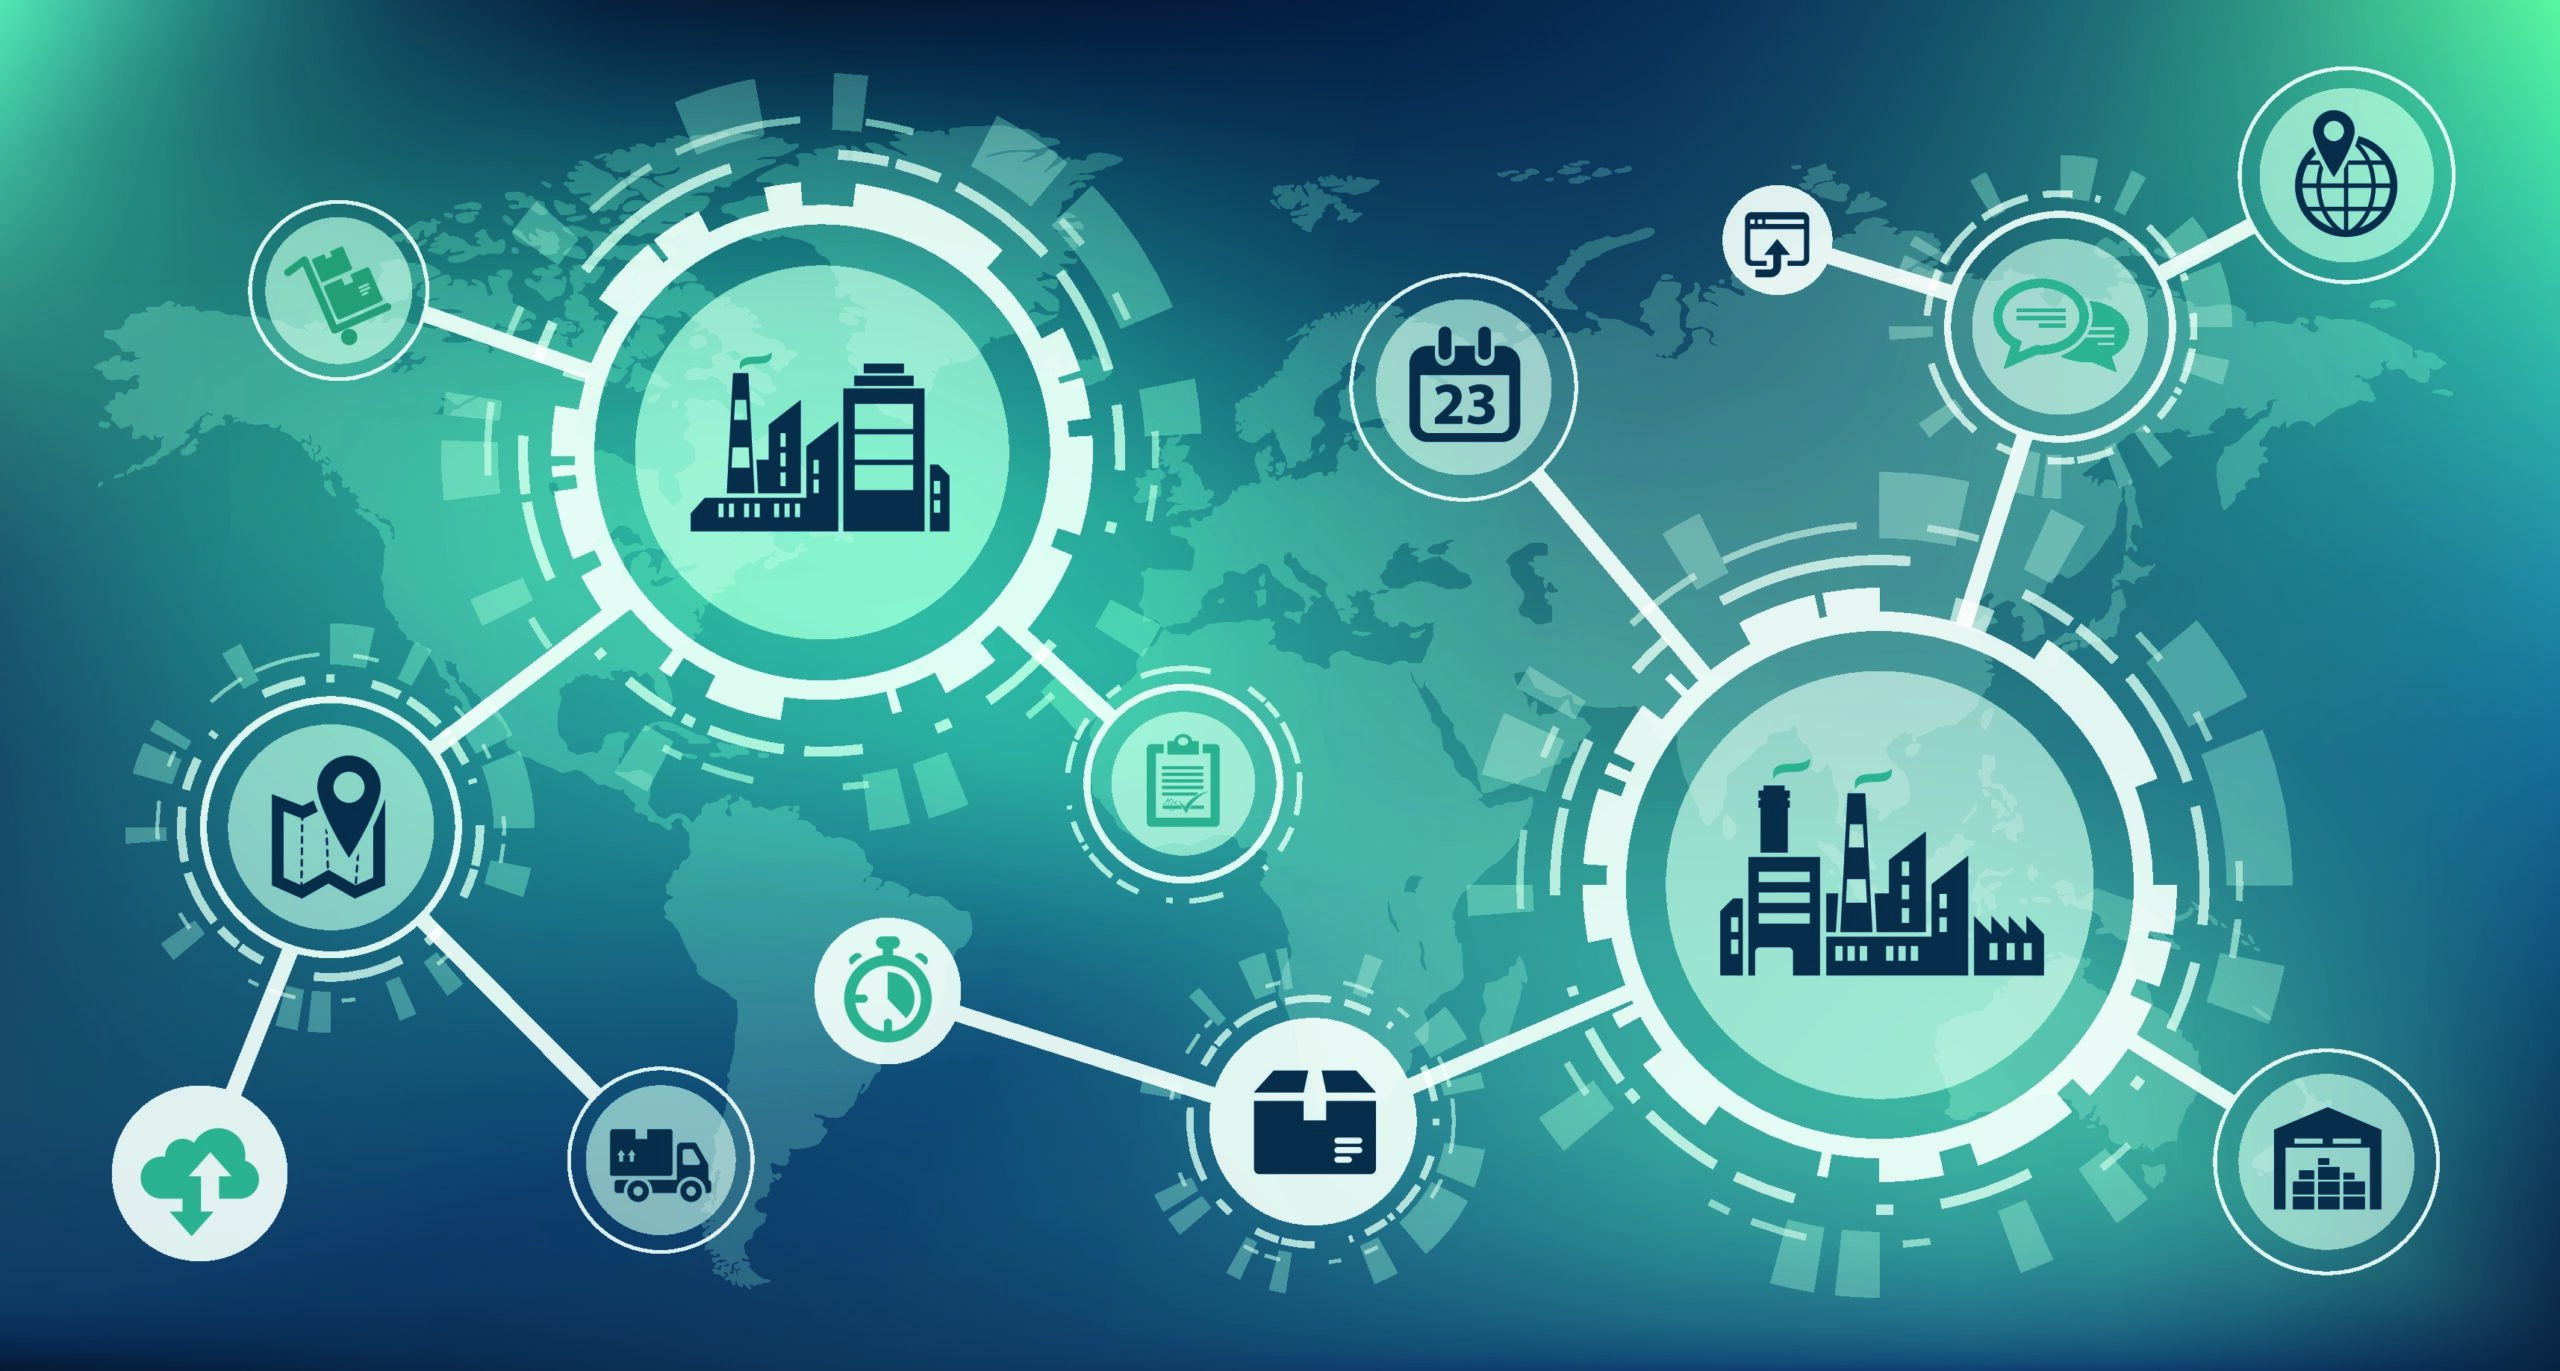 Blockchain Technology in Supply Chain Management: Benefits and Use Cases